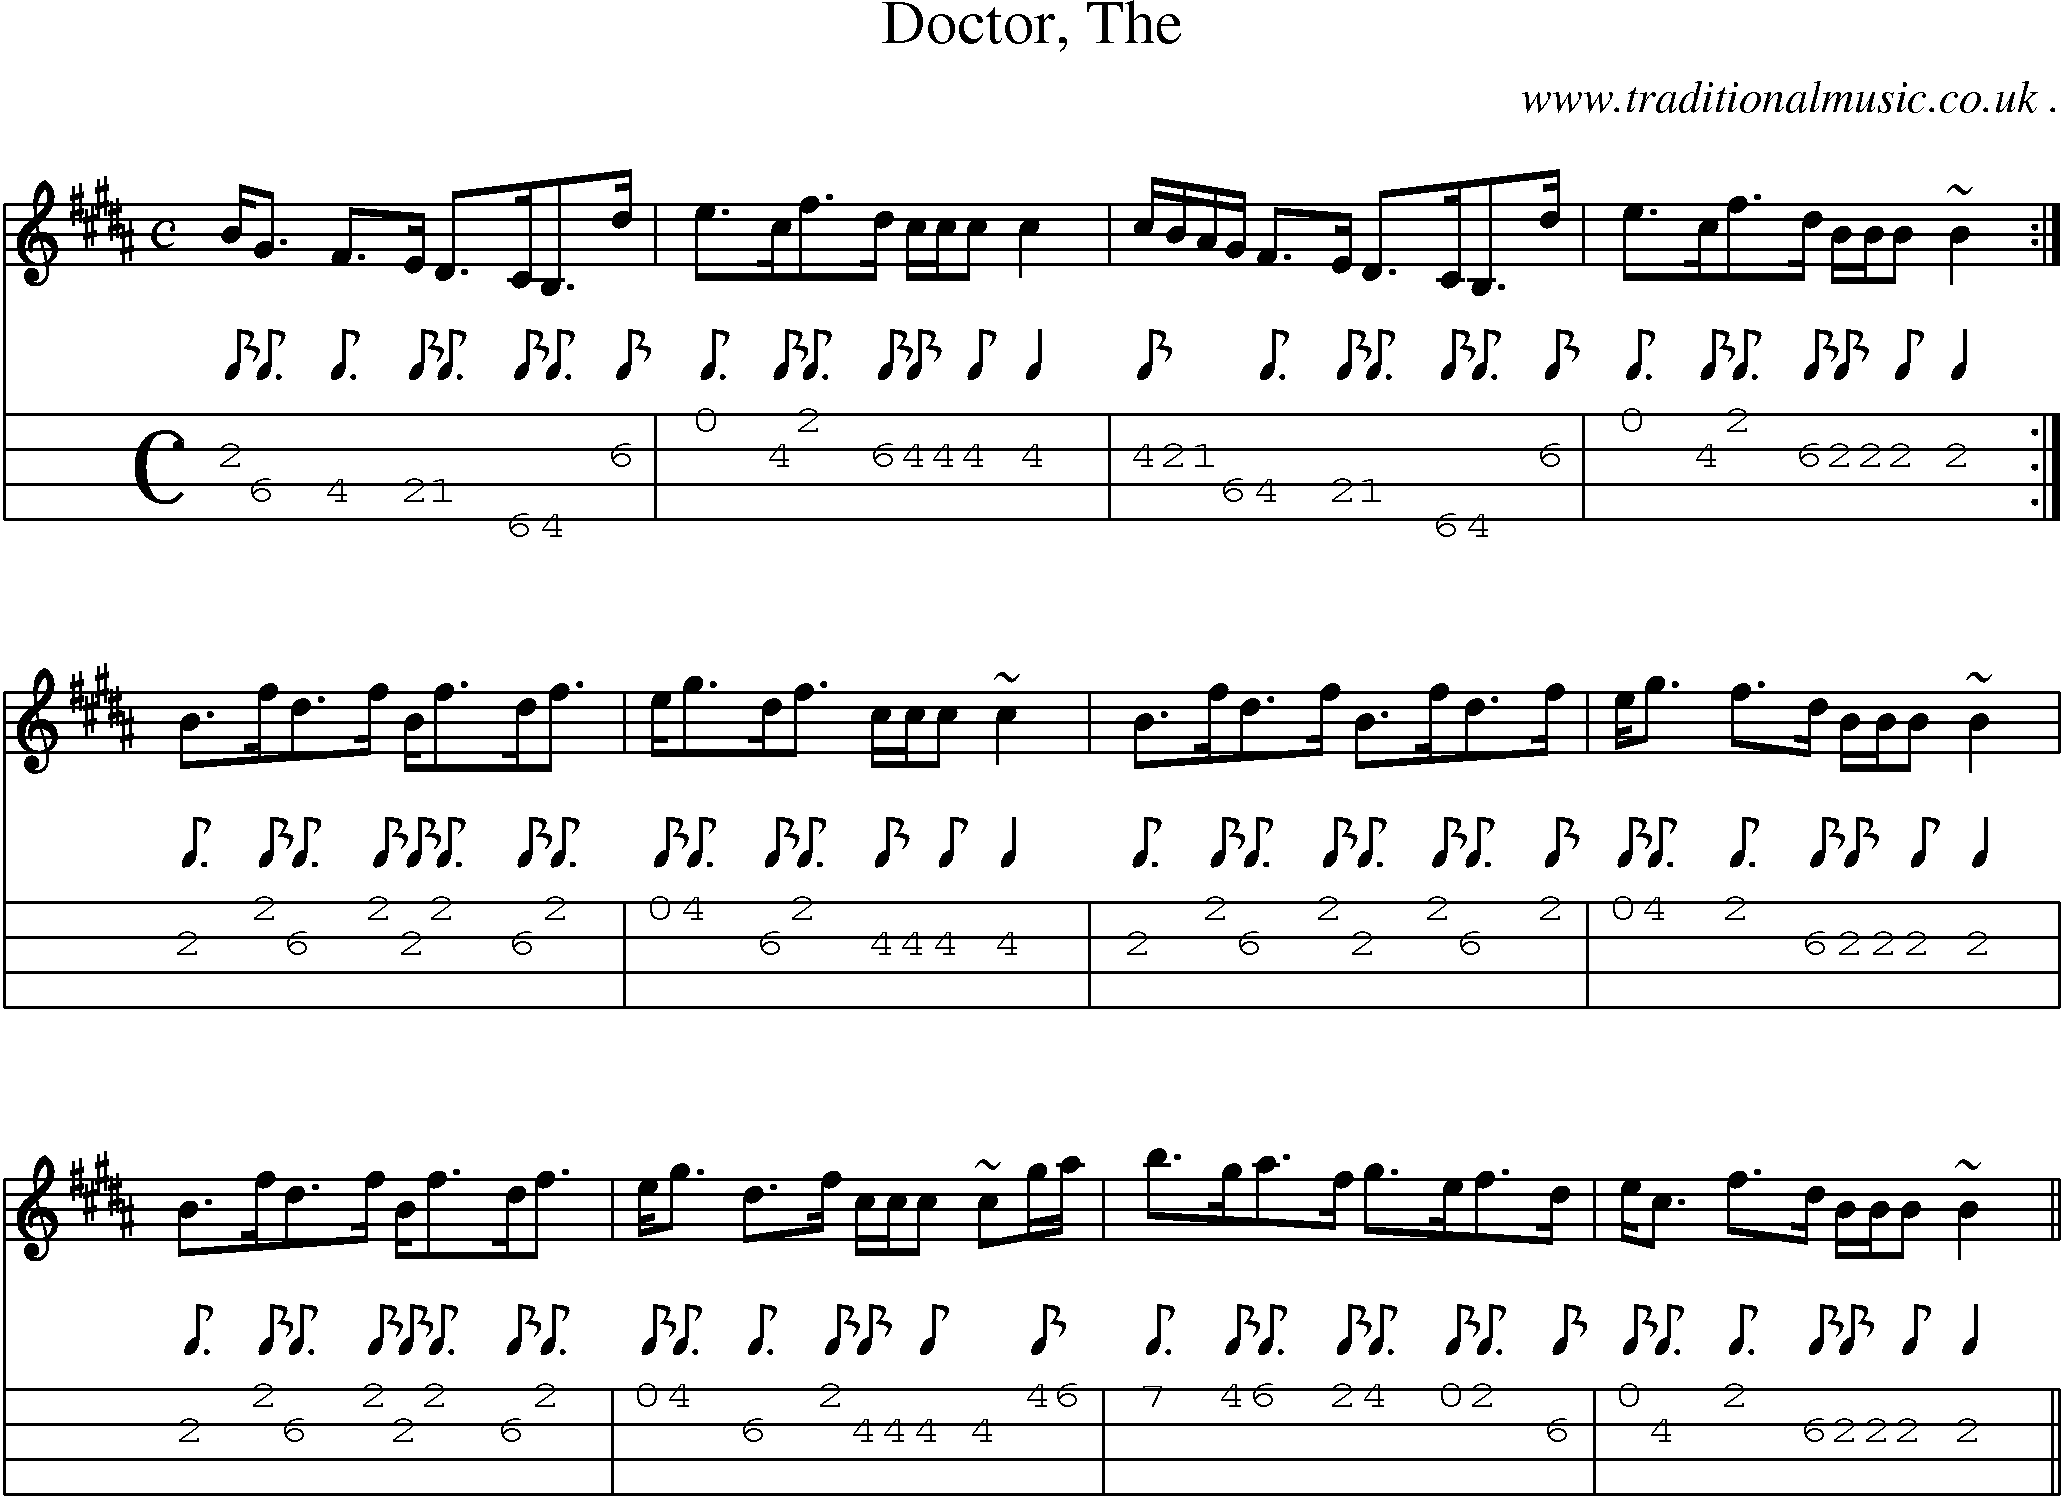 Sheet-music  score, Chords and Mandolin Tabs for Doctor The